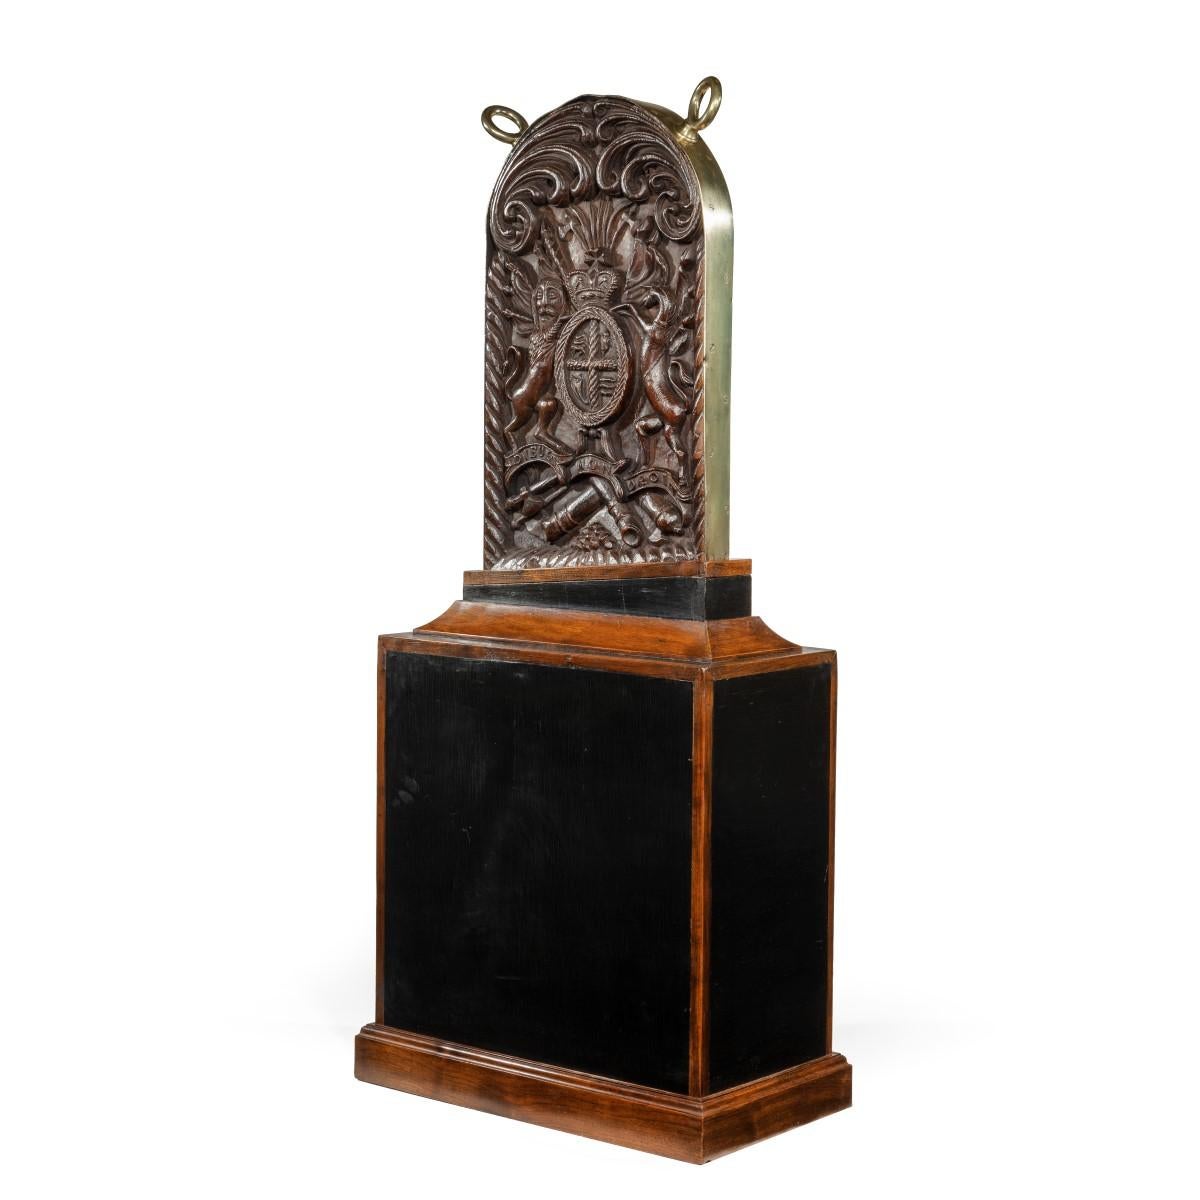 A Royal Naval ship’s elm companionway board, of rectangular form with an arched top and two sturdy brass rings, naively carved with a crowned coat of arms flanked by a lion and unicorn against a panoply of arms, all below bold confronting C-scrolls,